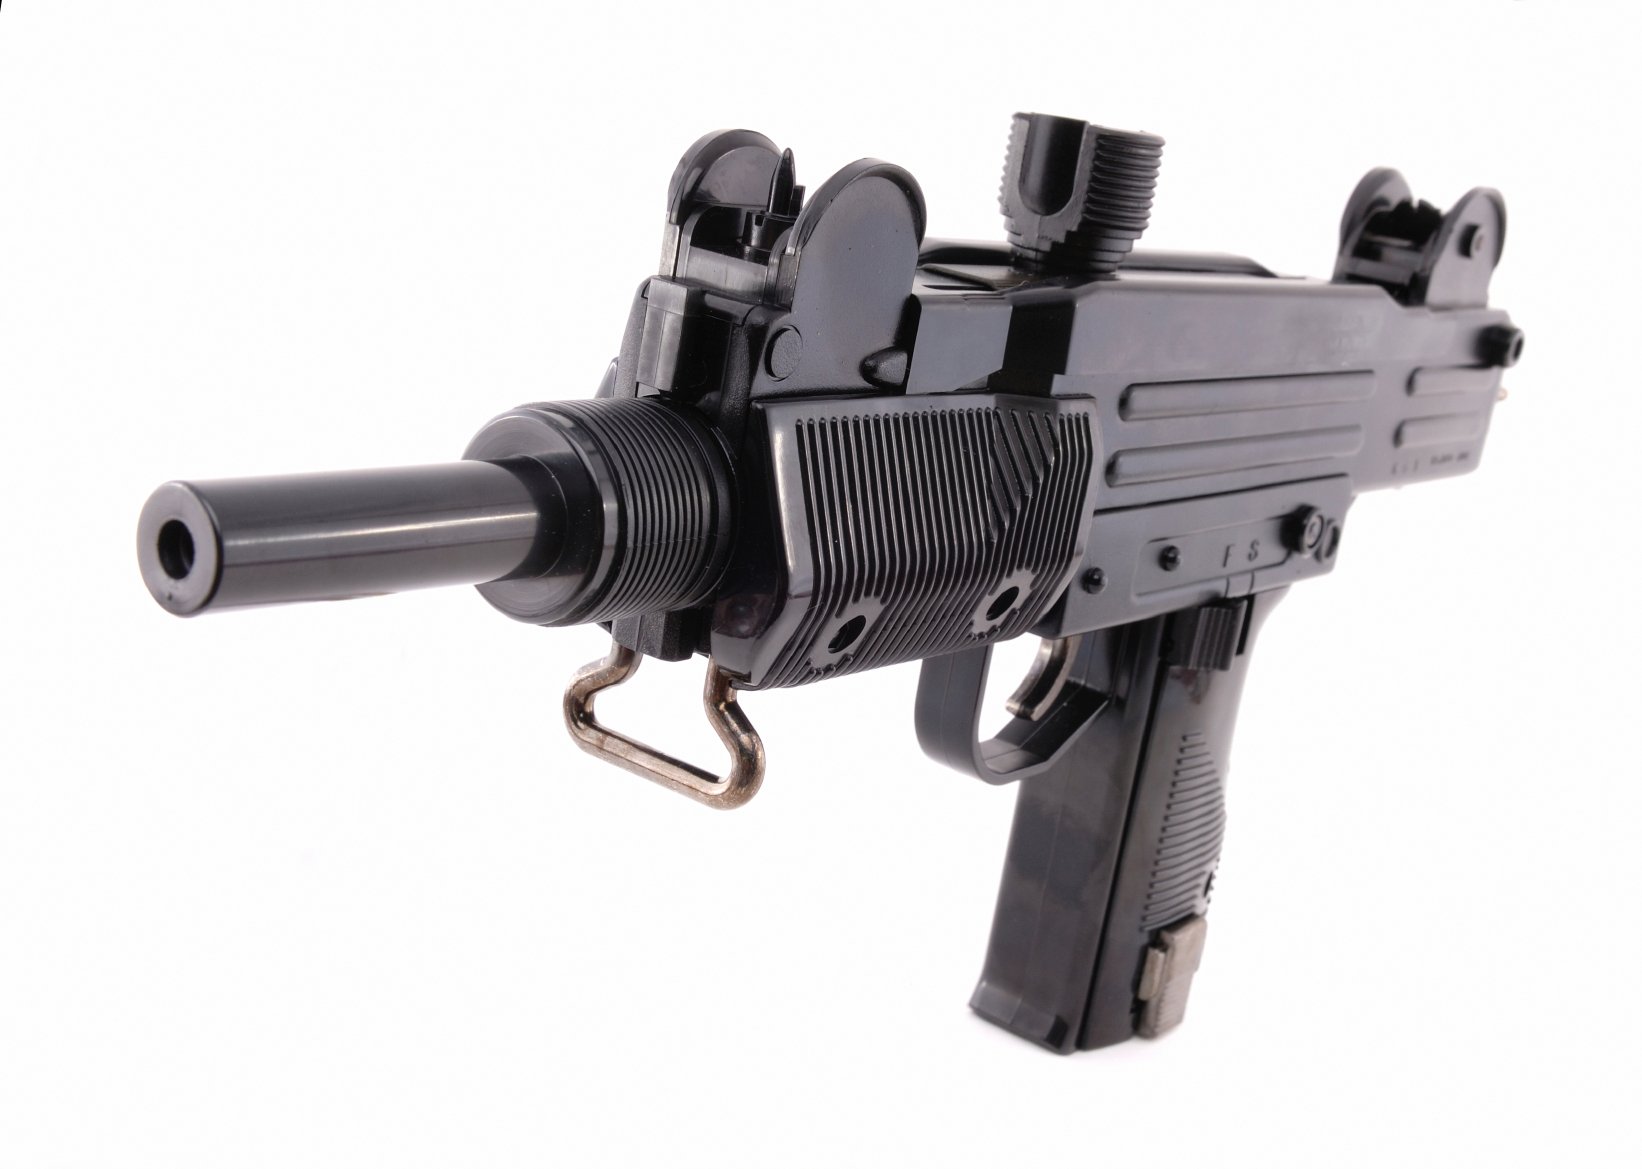 The Uzi Submachine Gun Is Back And Ready to Spray Some Lead | The